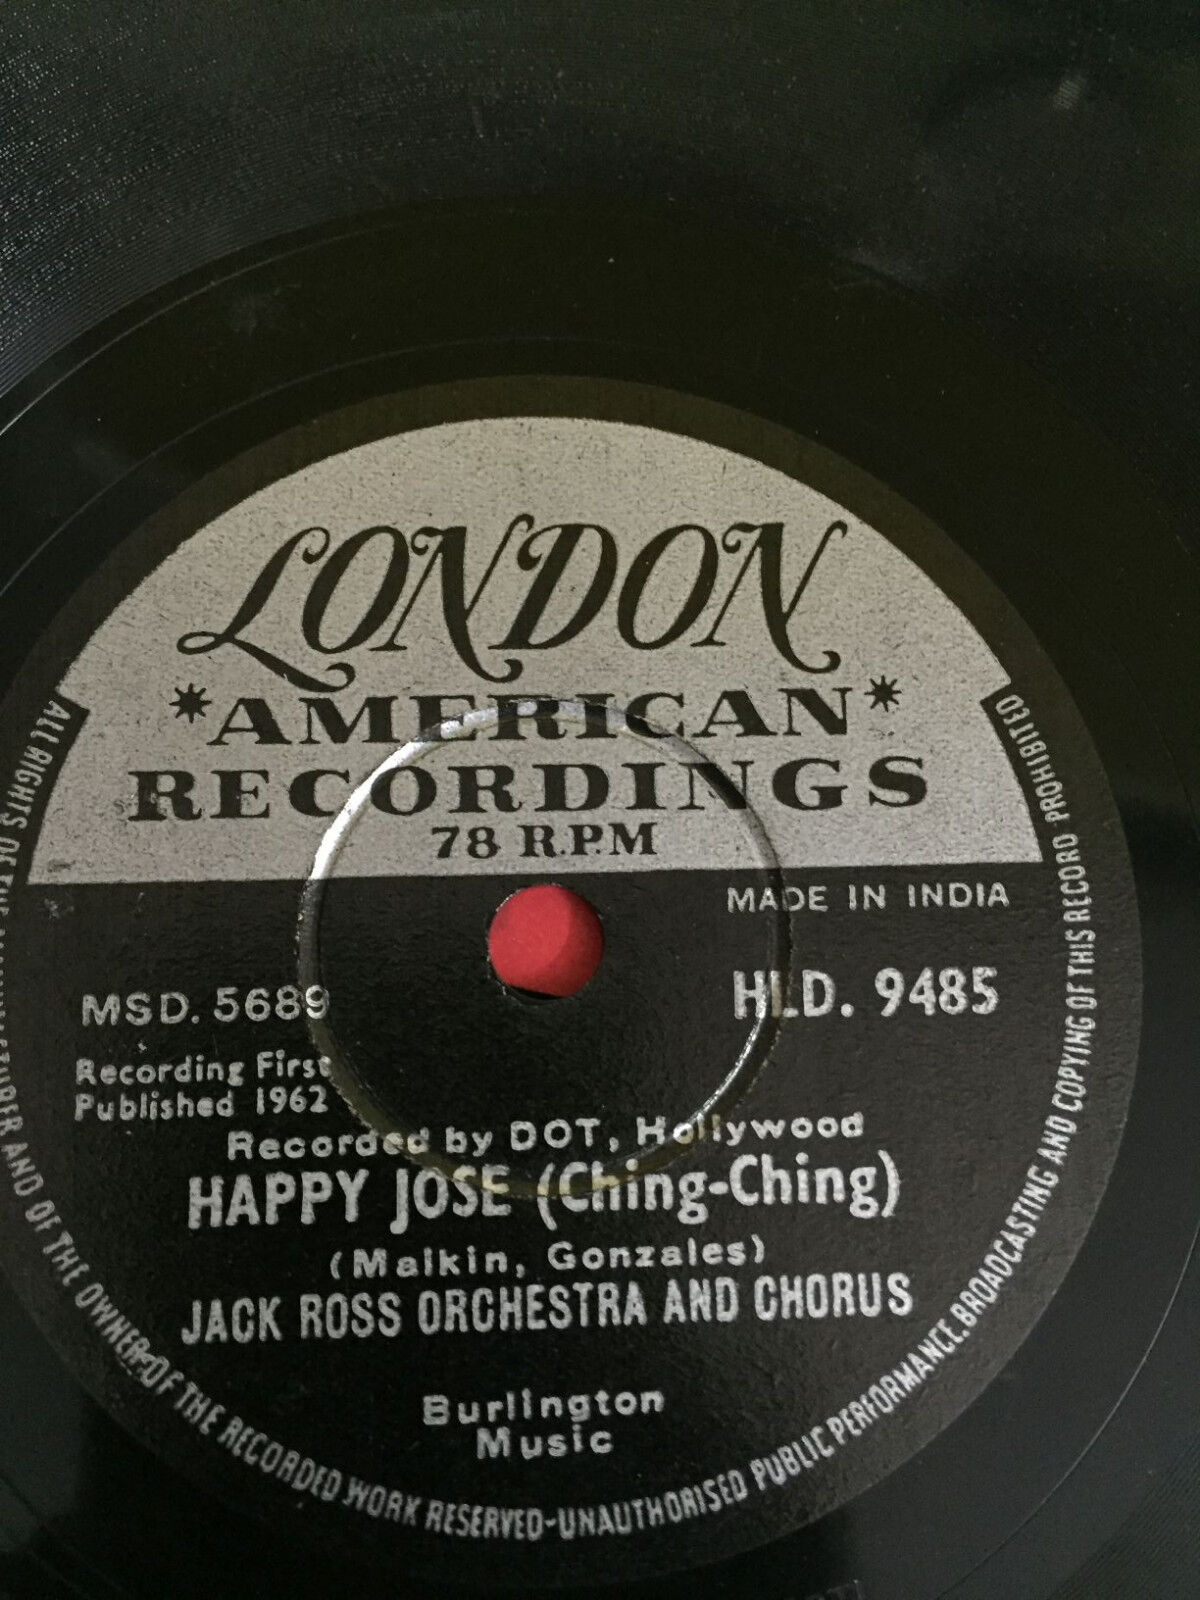 JACK ROSS ORCHESTRA HAPPY JOSE/SWEET GEORGIA BROWN RARE 78 RPM RECORD INDIA vg++